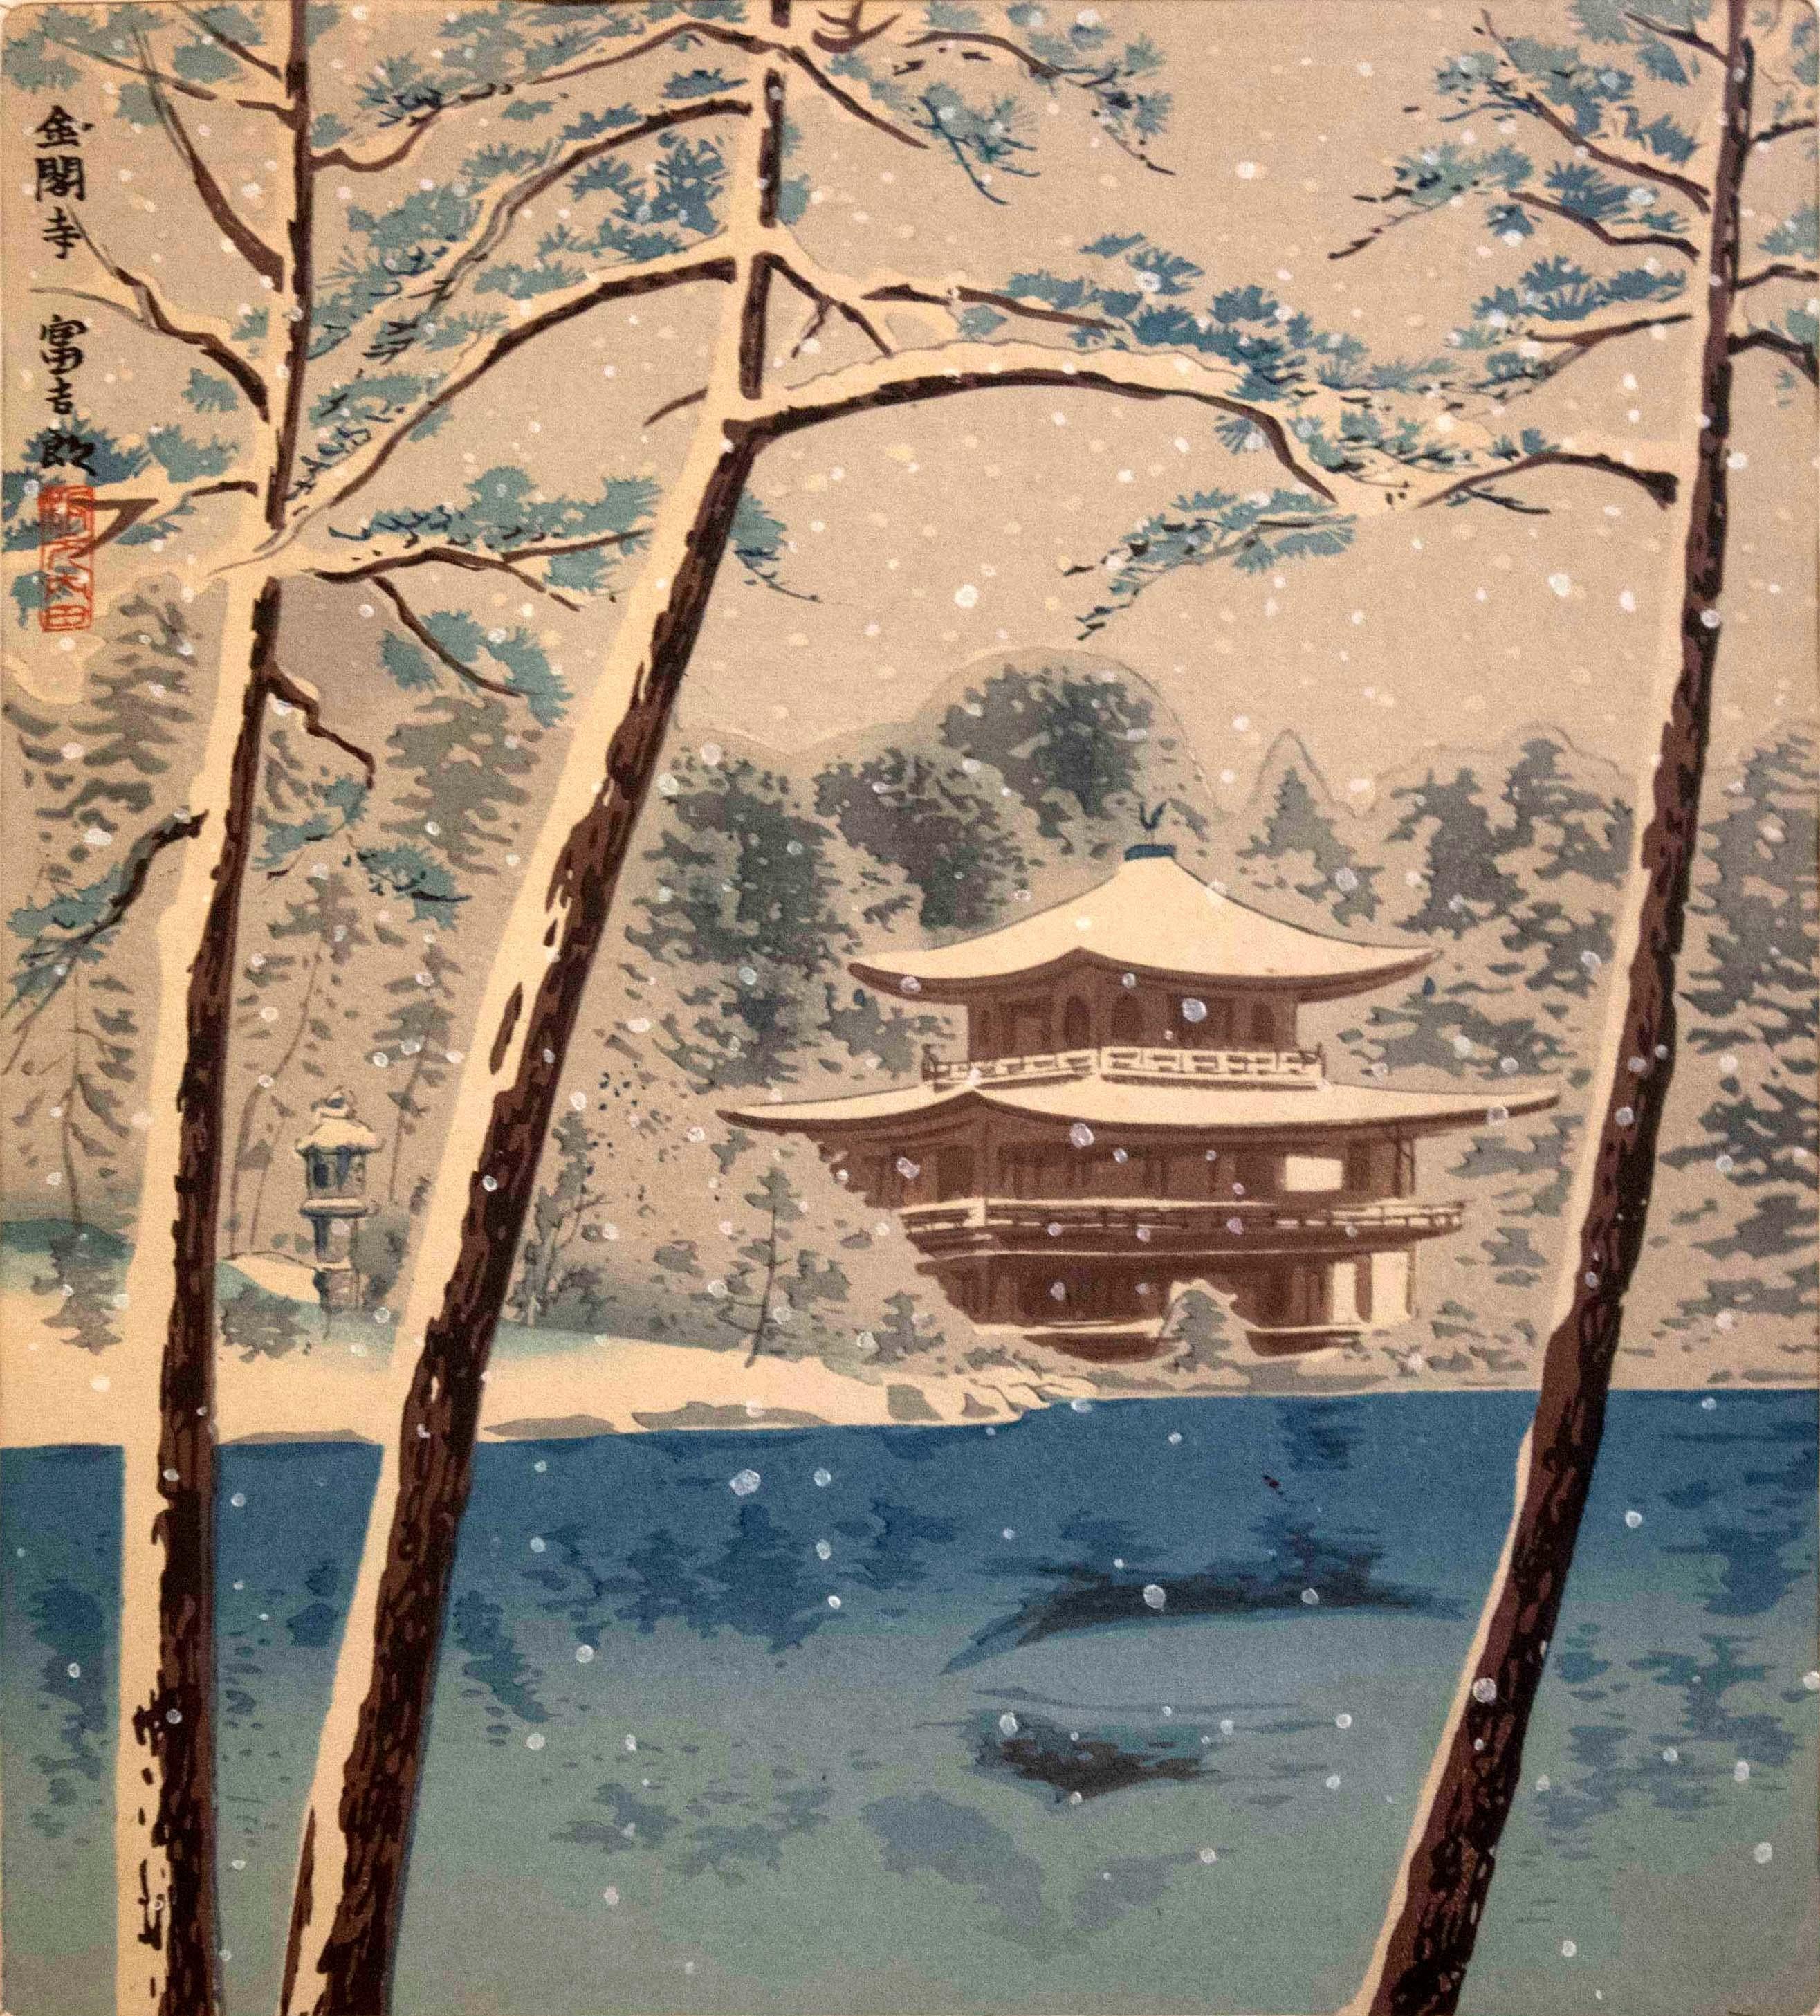 For your consideration is a stunning antique Japanese woodcut by Tomikichiro Tokuriki. Dimensions: 15.5h x 13.5w (framed). In excellent condition.
Dimensions
15.5 x 13.5 in.